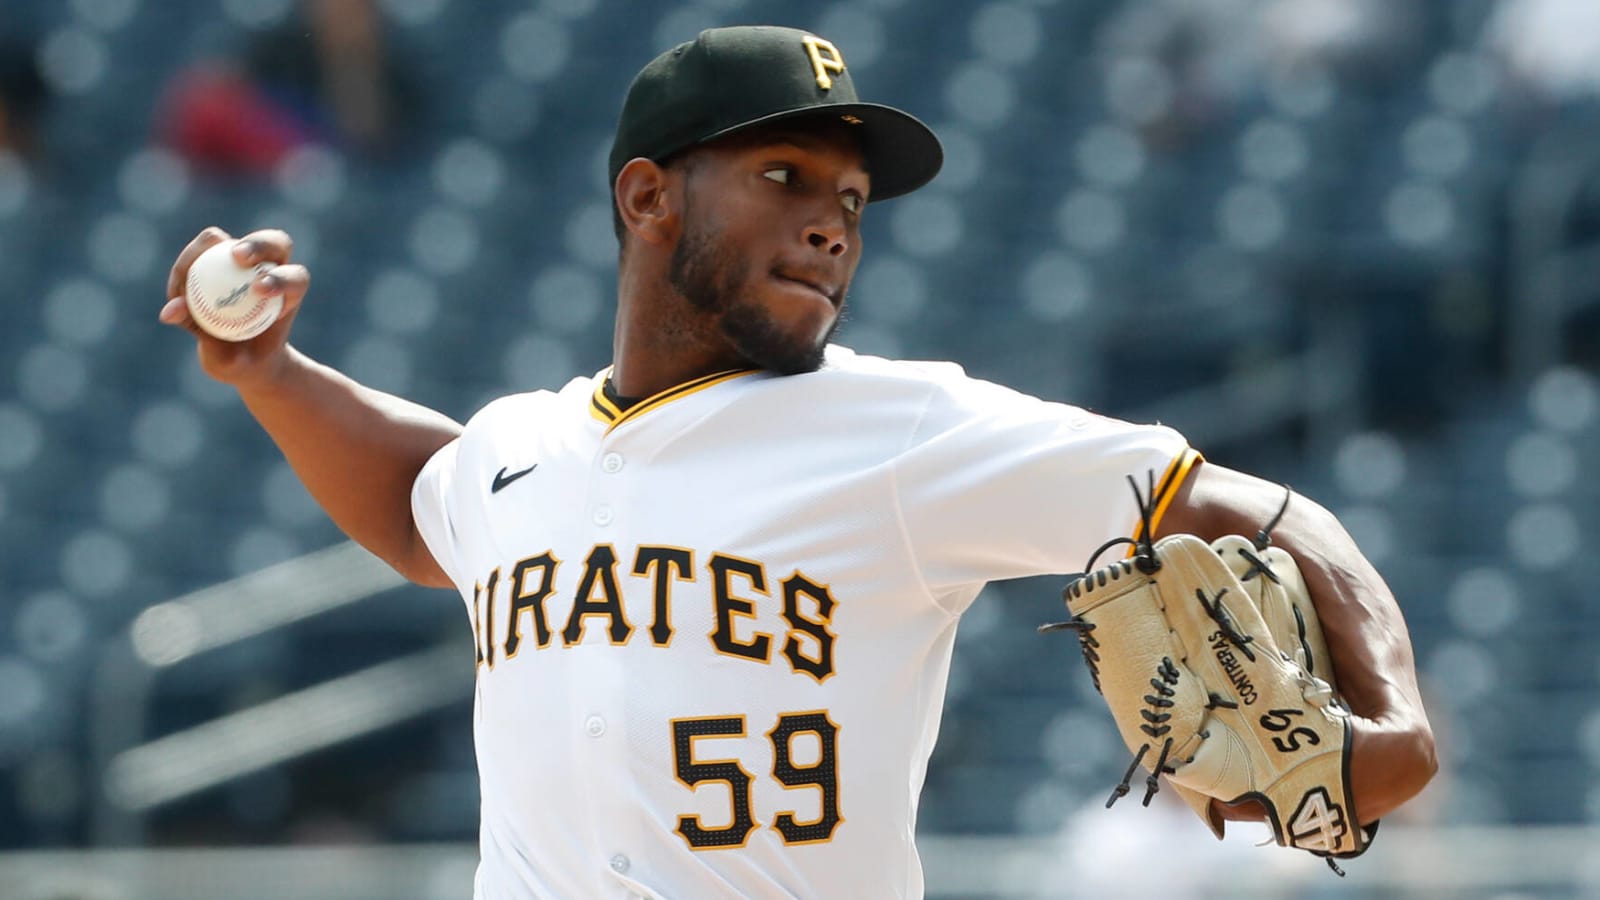 Pirates DFA former top pitching prospect, place 3B on IL